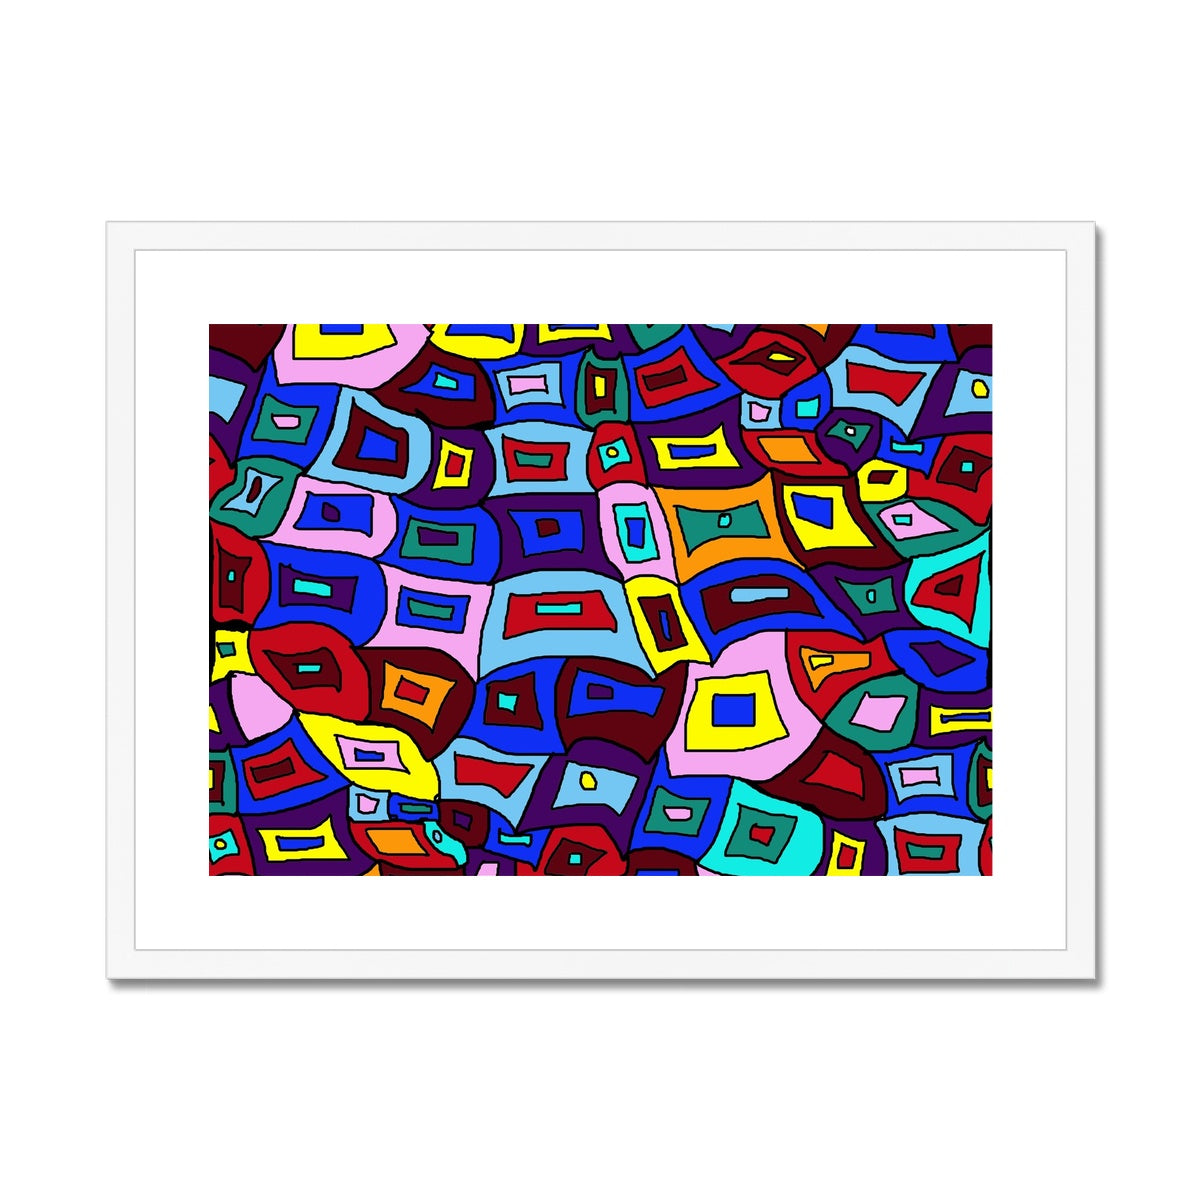 Wavy Square Pattern Framed & Mounted Print